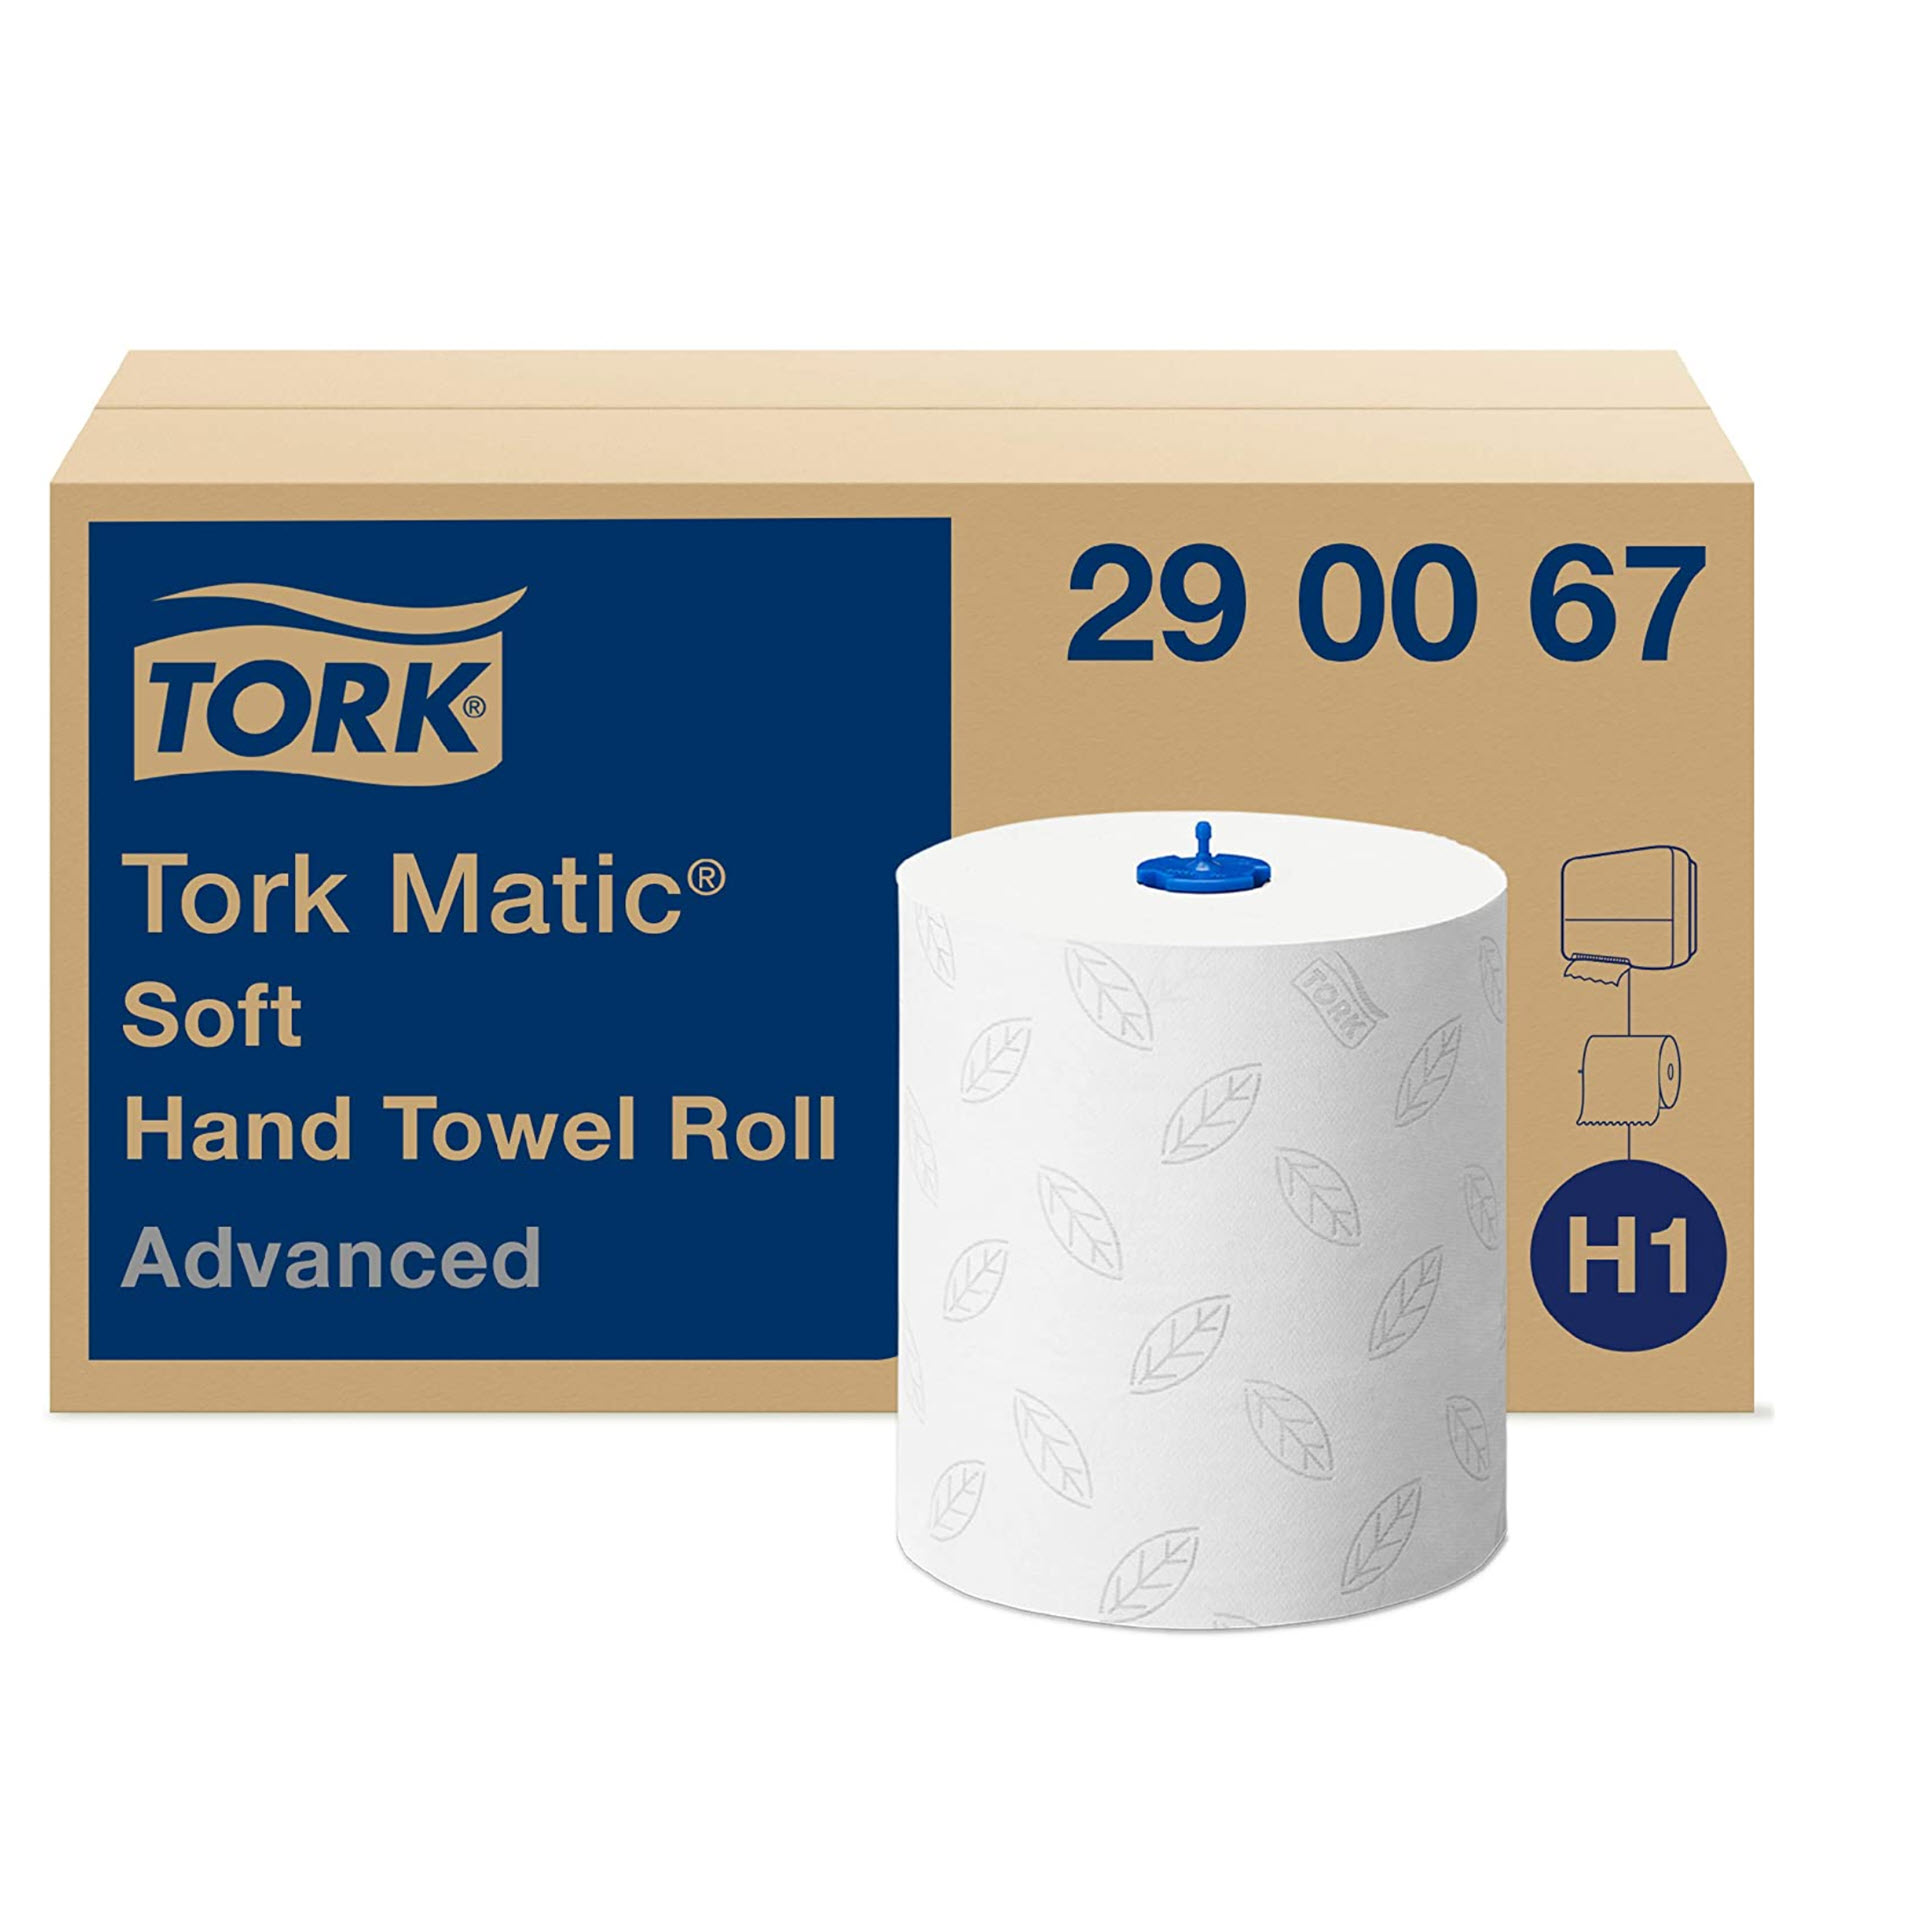 Tork Matic® weisses Rollenhandtuch Advanced 2-lagig TAD & Tissue - 290067 H1